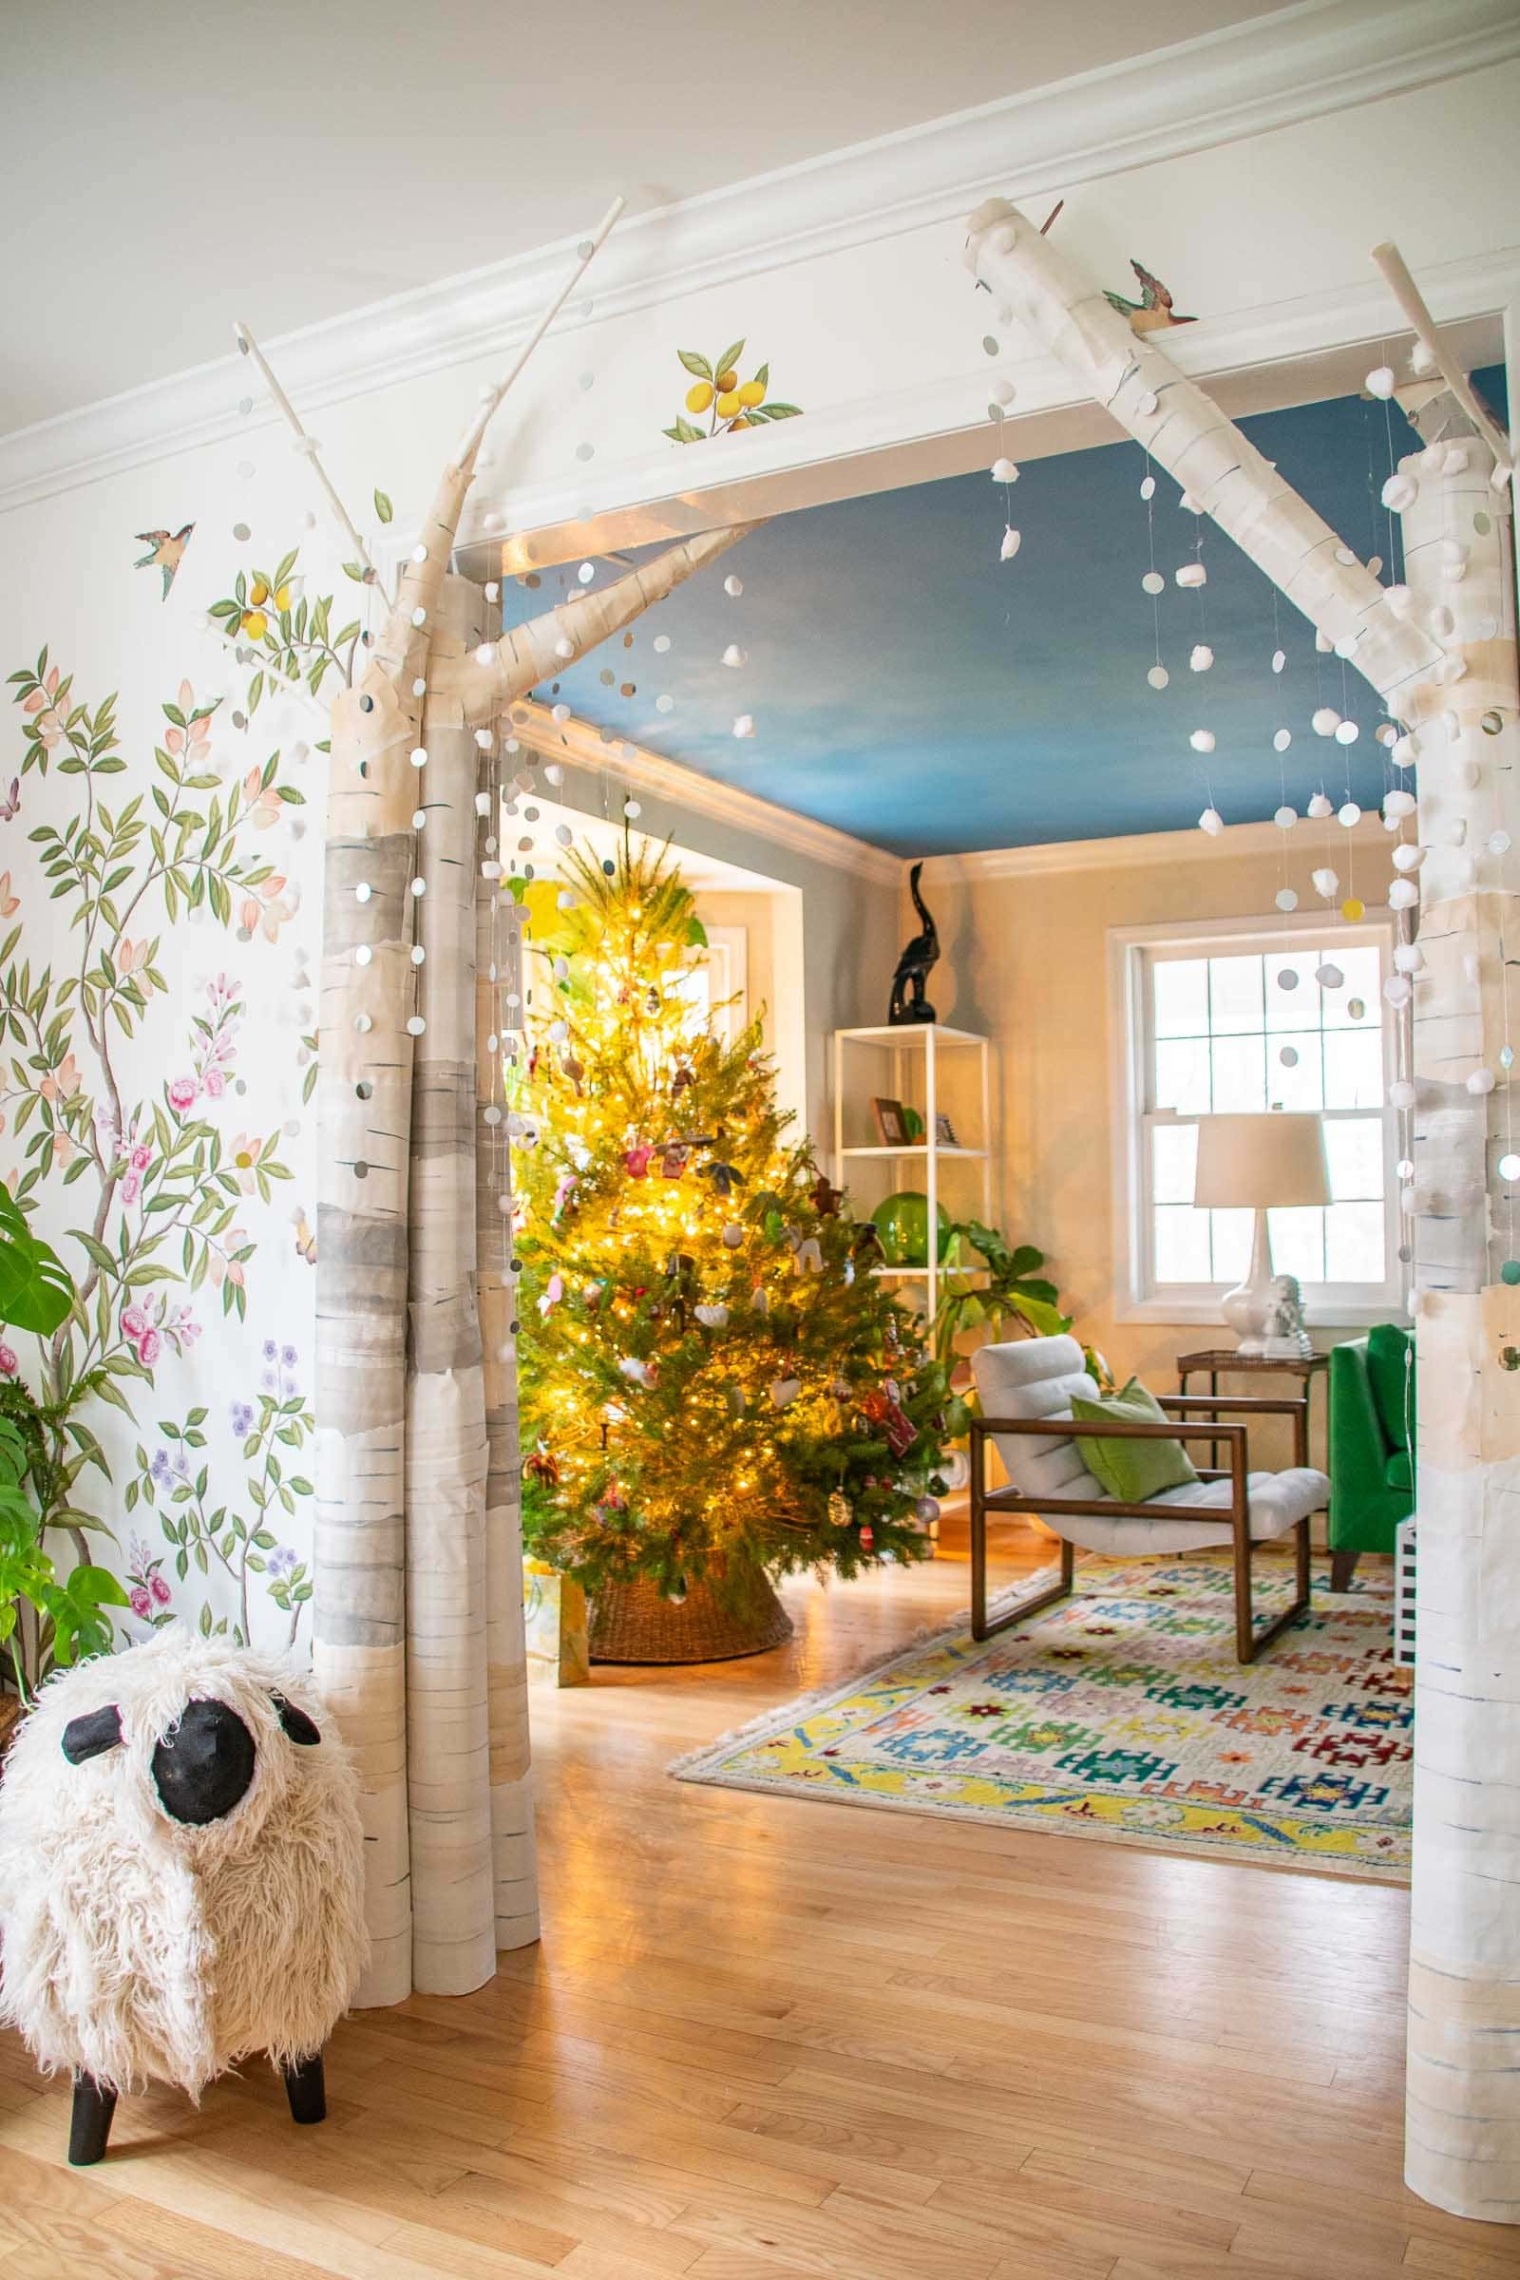 birch tree decorating ideas Bulan 5 How to Make the Holiday White House Birch Trees in Your Own Home